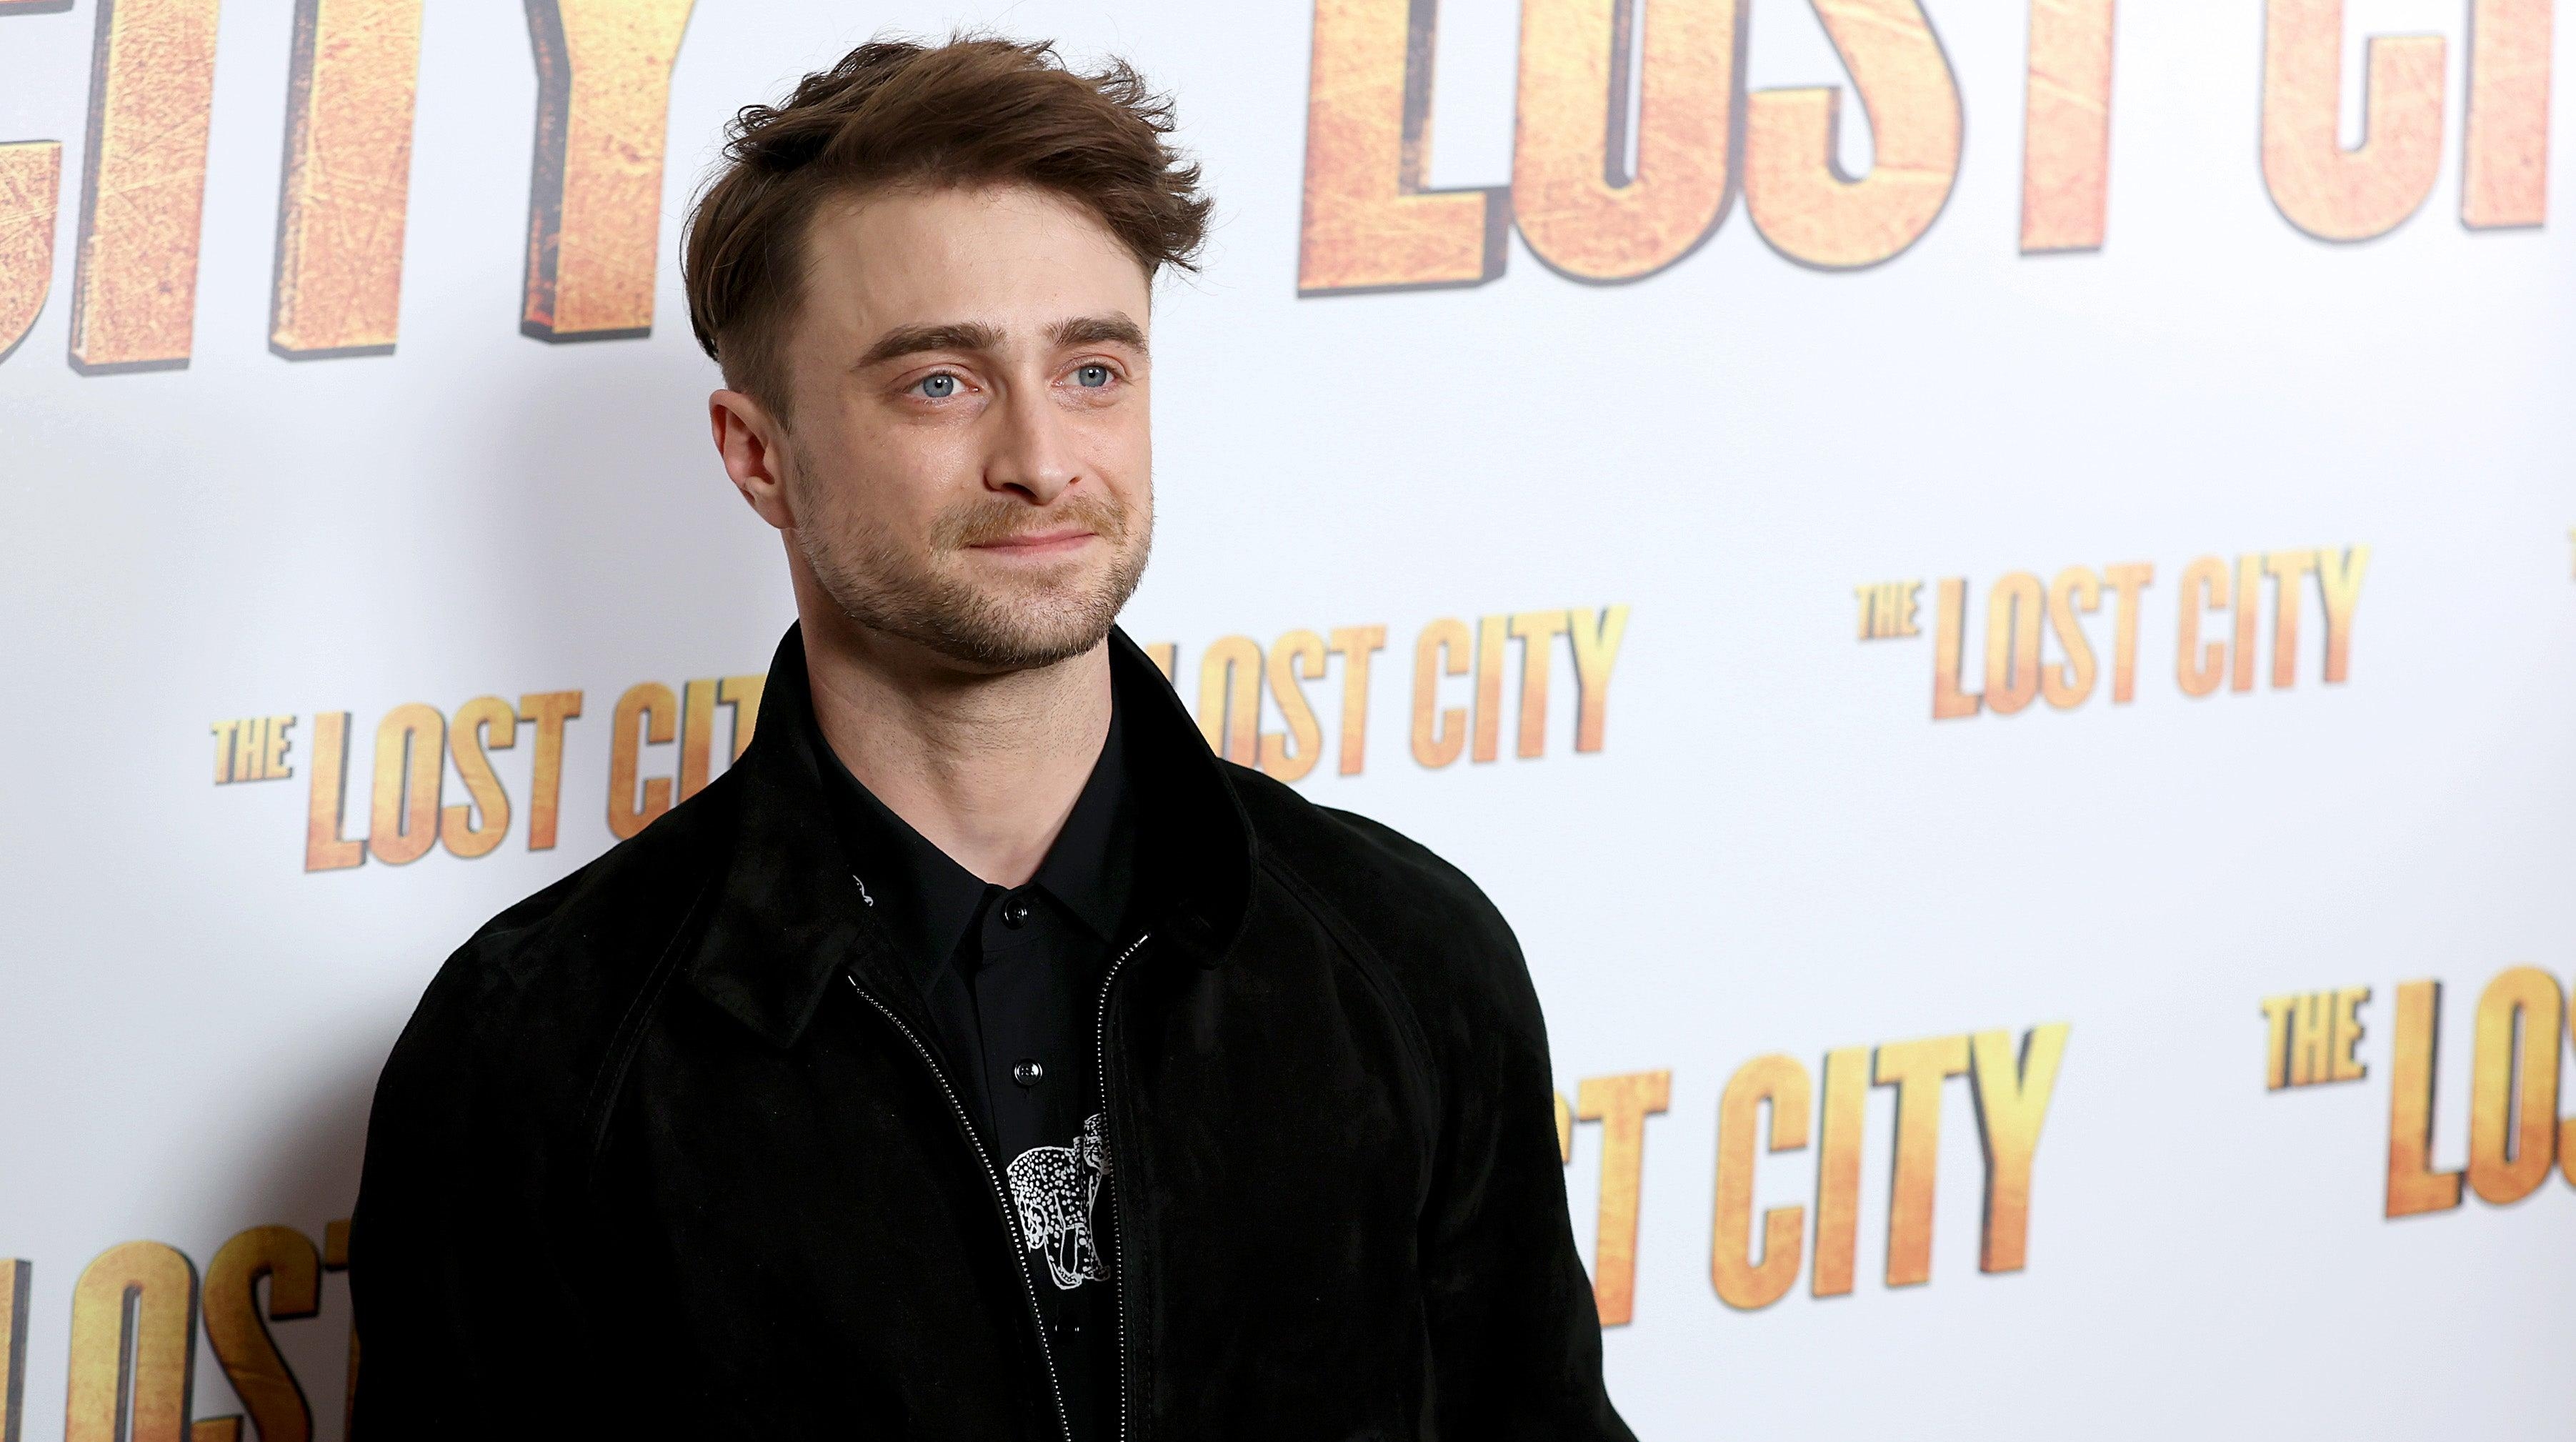 Daniel Radcliffe is not ready to play Harry Potter again any time soon